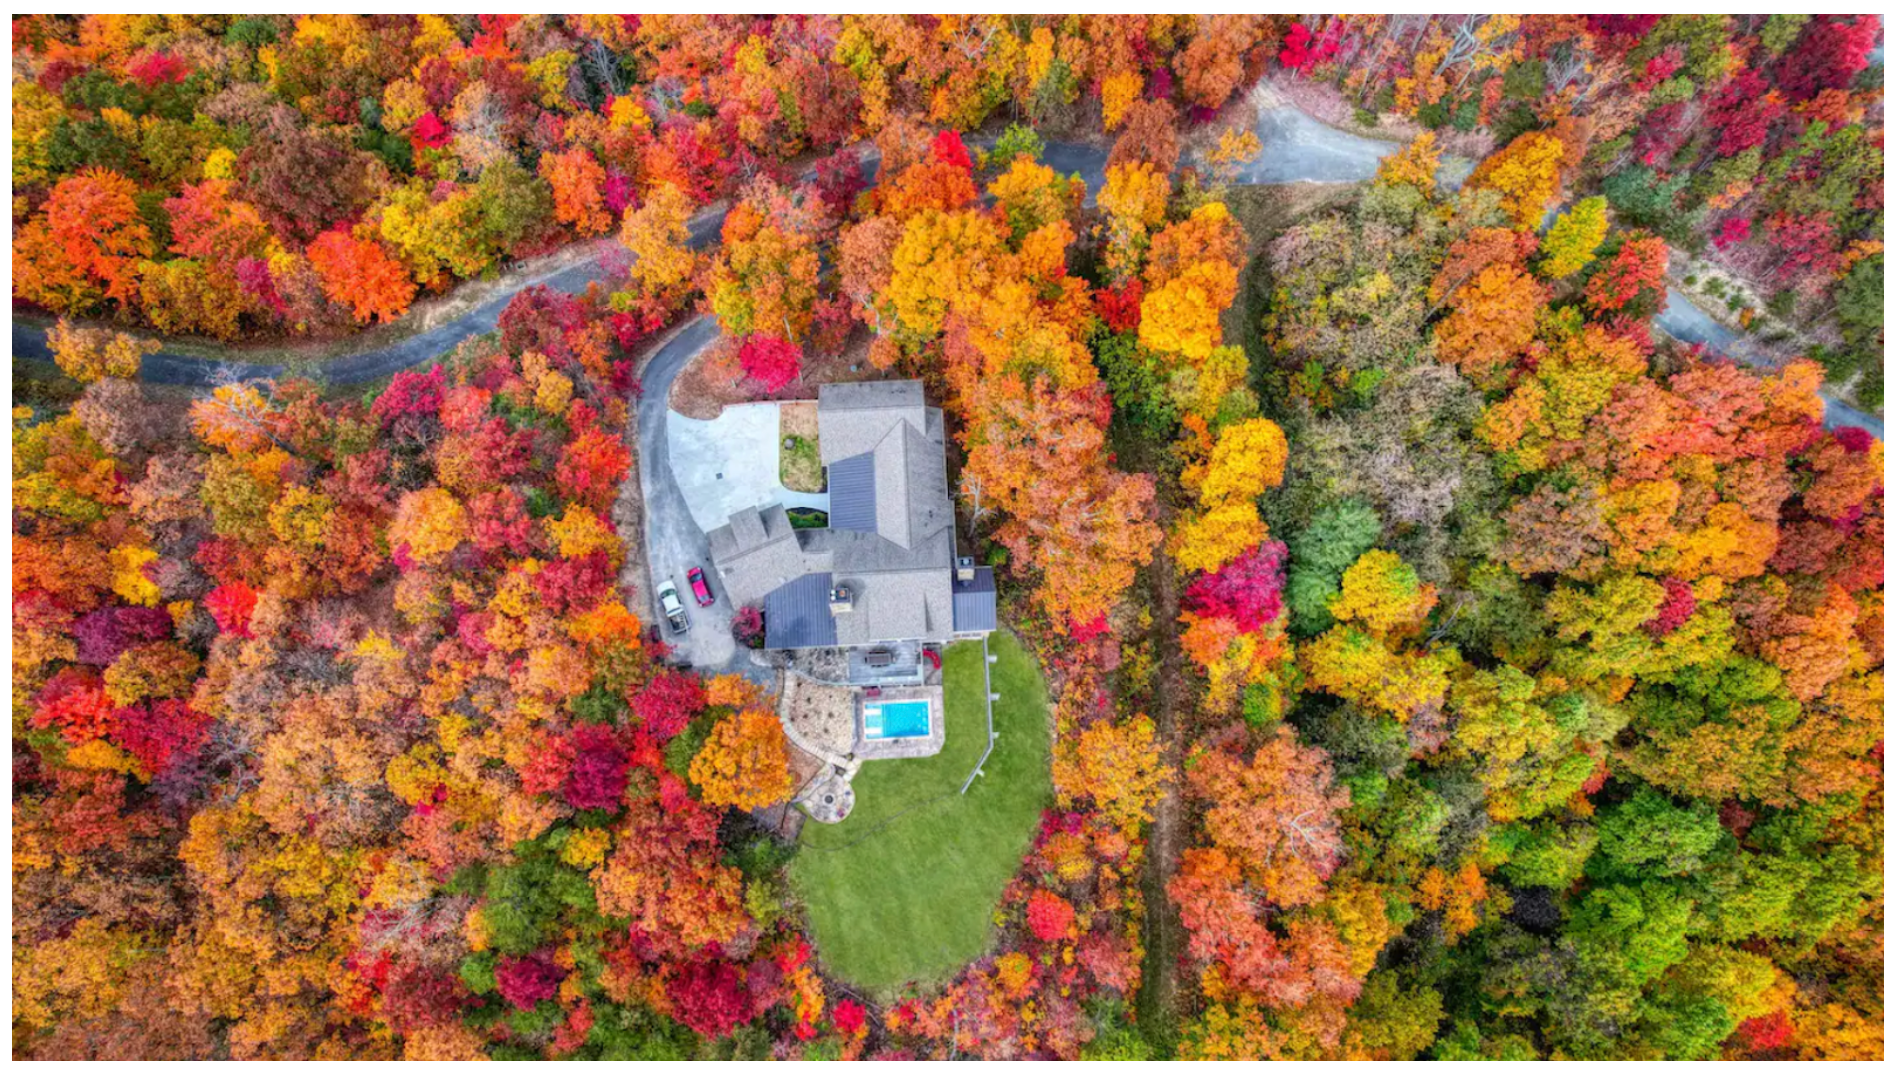 drone photography is highly recommended by Gatlinburg, Pigeon Forge, and Sevierville property managers